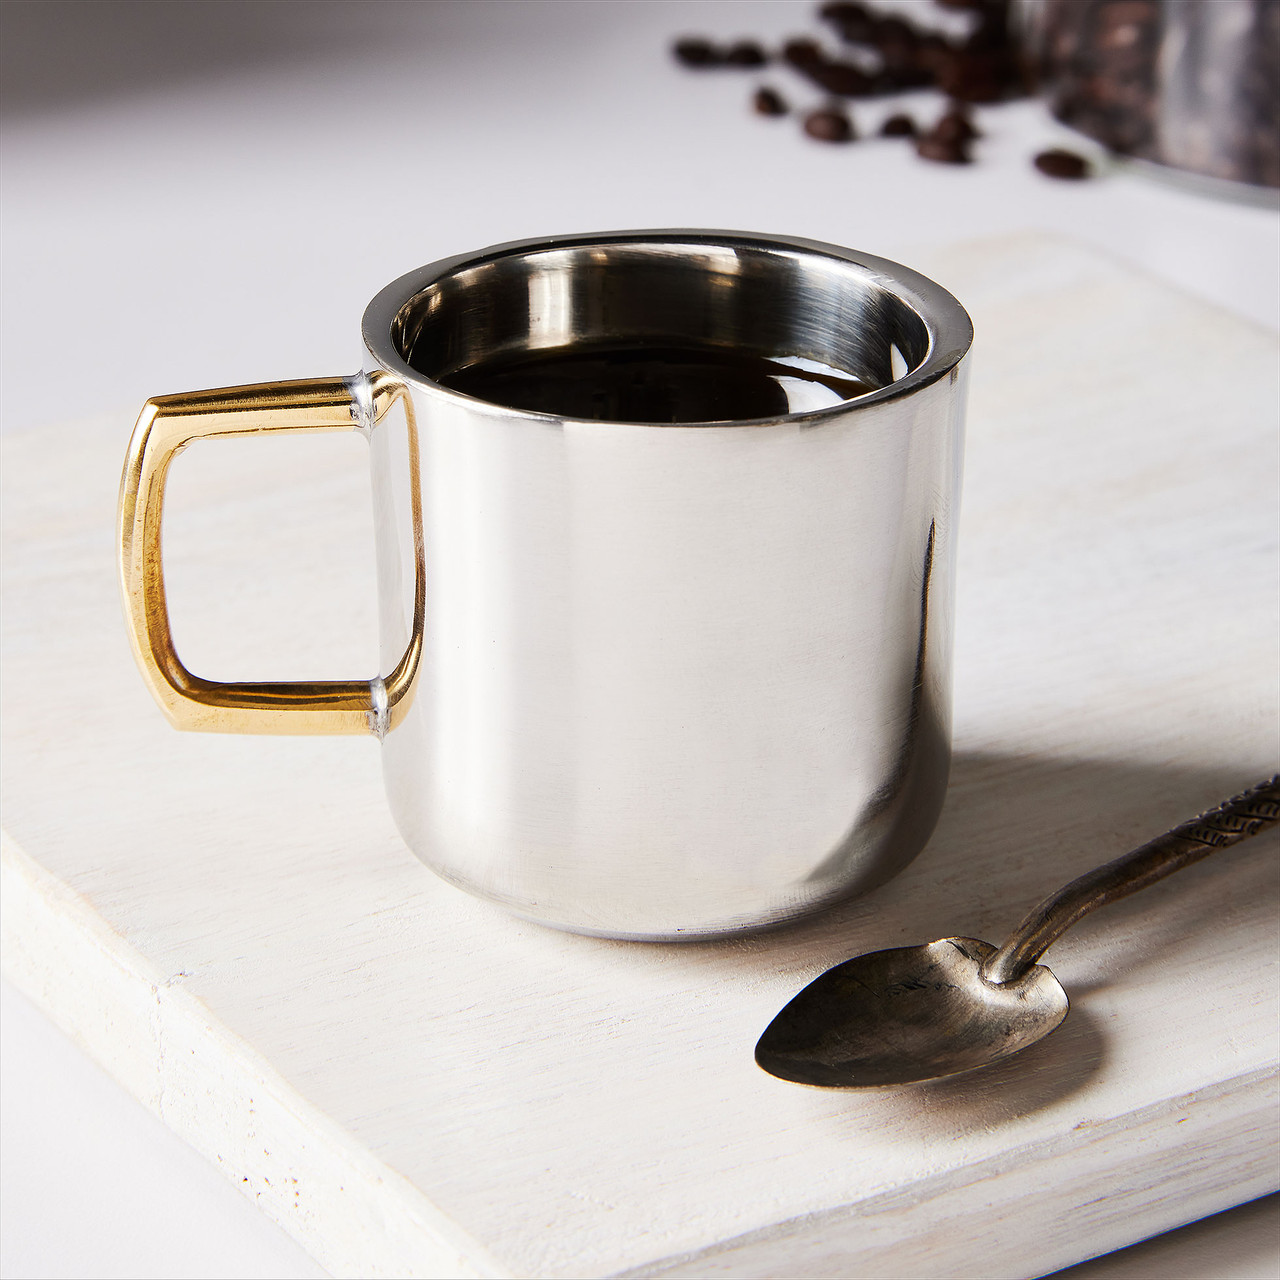 Insulated Stainless Steel Coffee Cup, Saucer